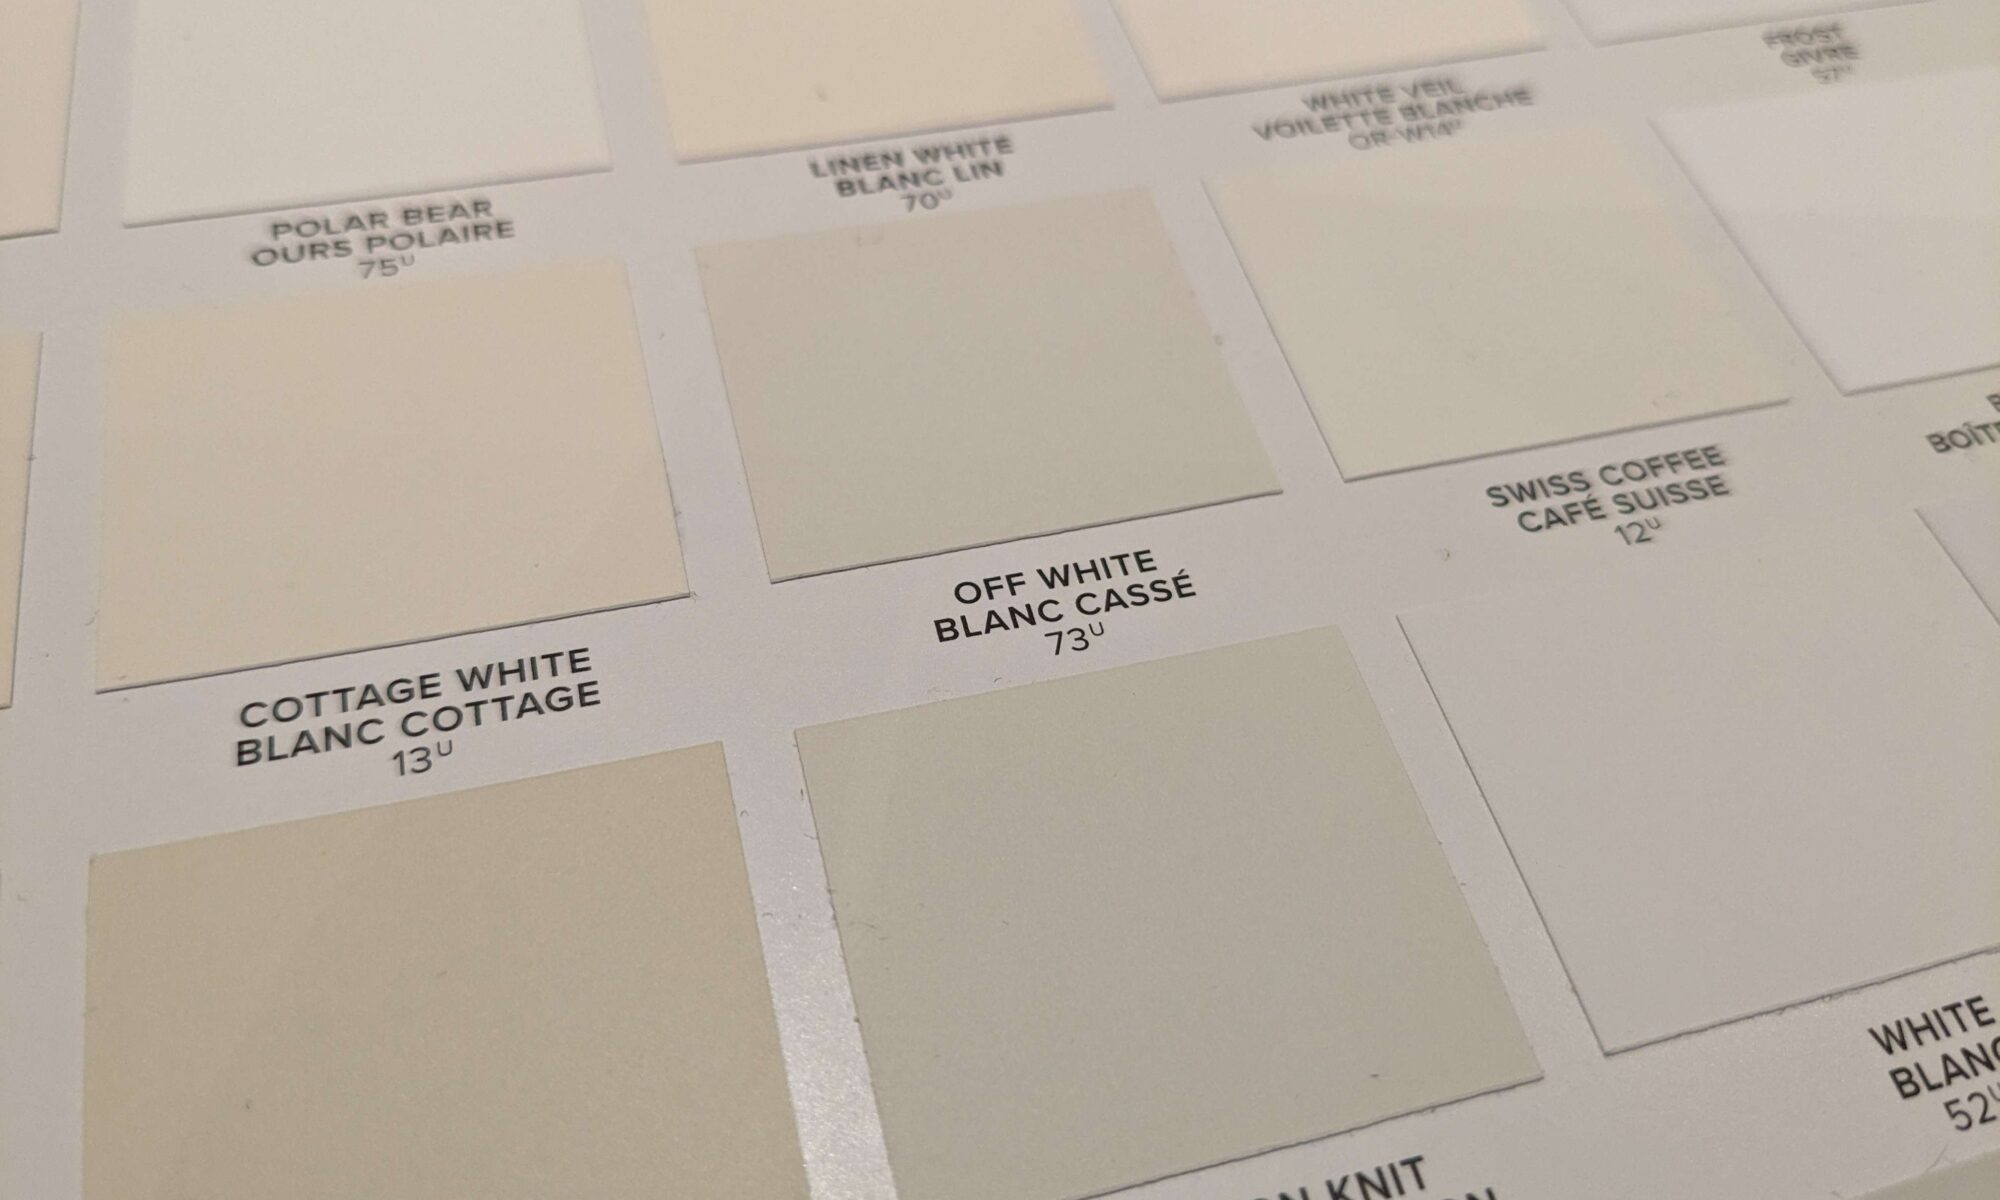 Various shades of white are displayed along with their names and corresponding paint codes. It's positively overwhelming.